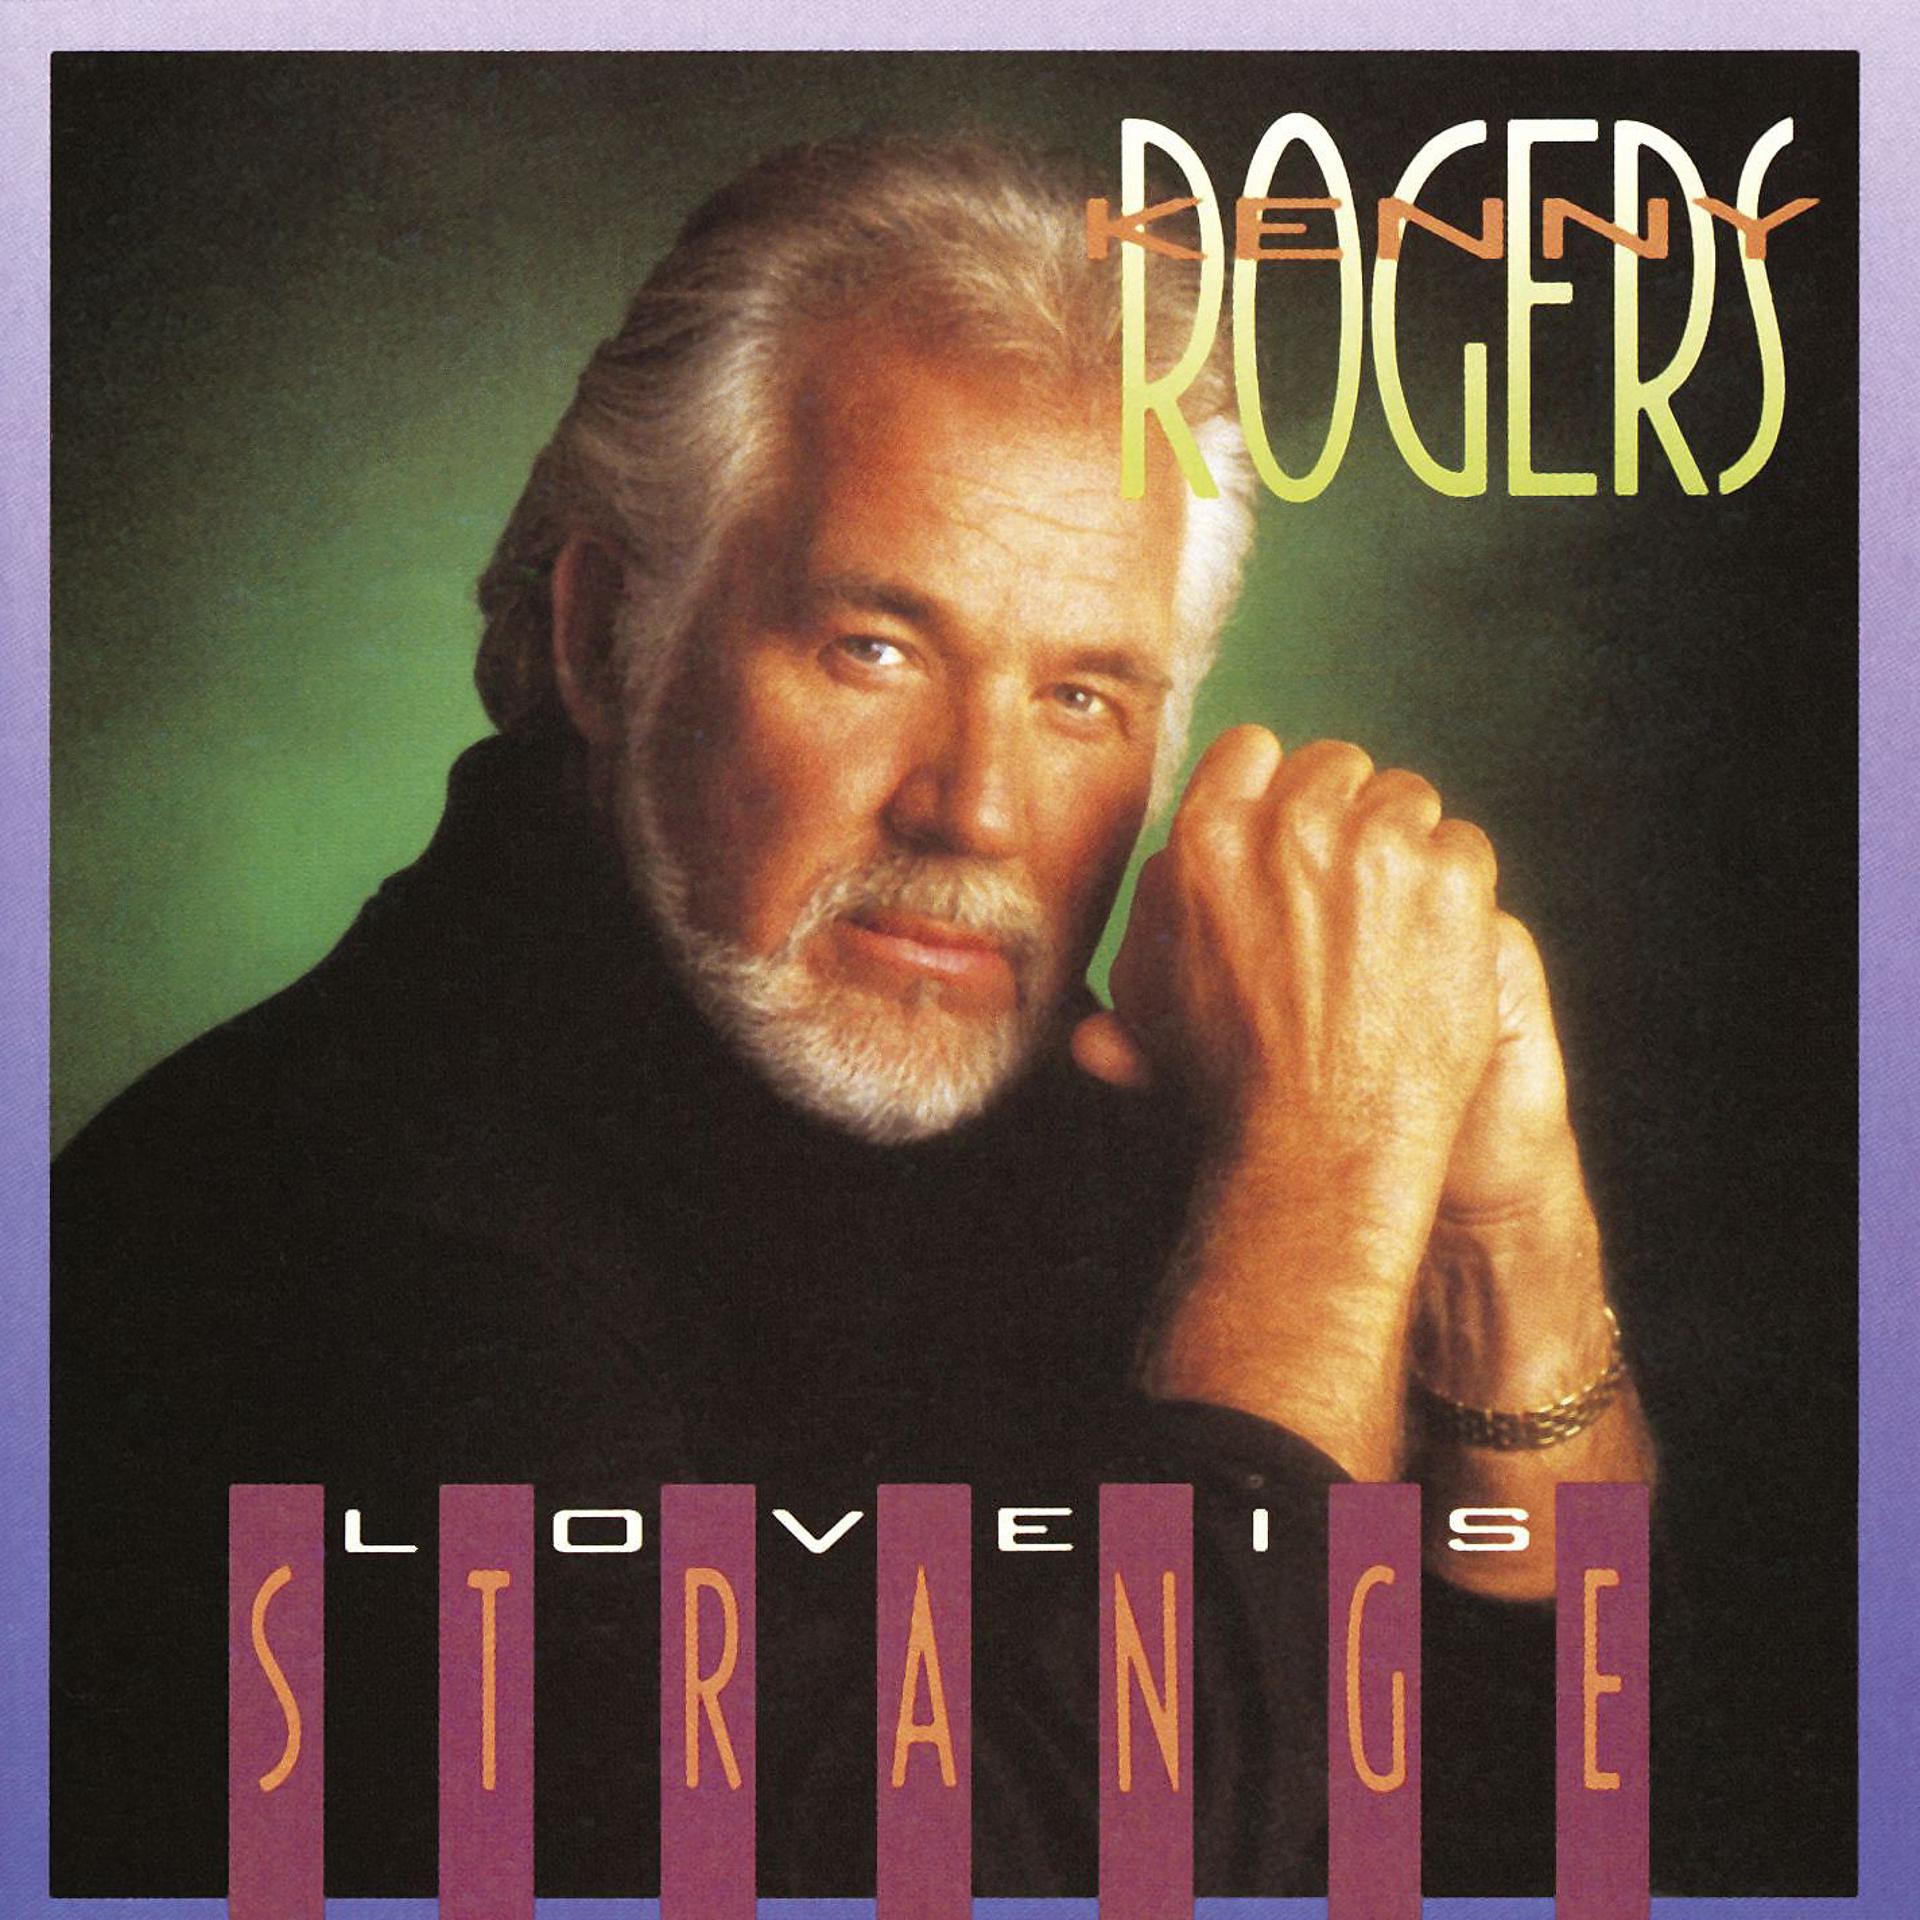 Постер к треку Kenny Rogers - If I Were a Painting